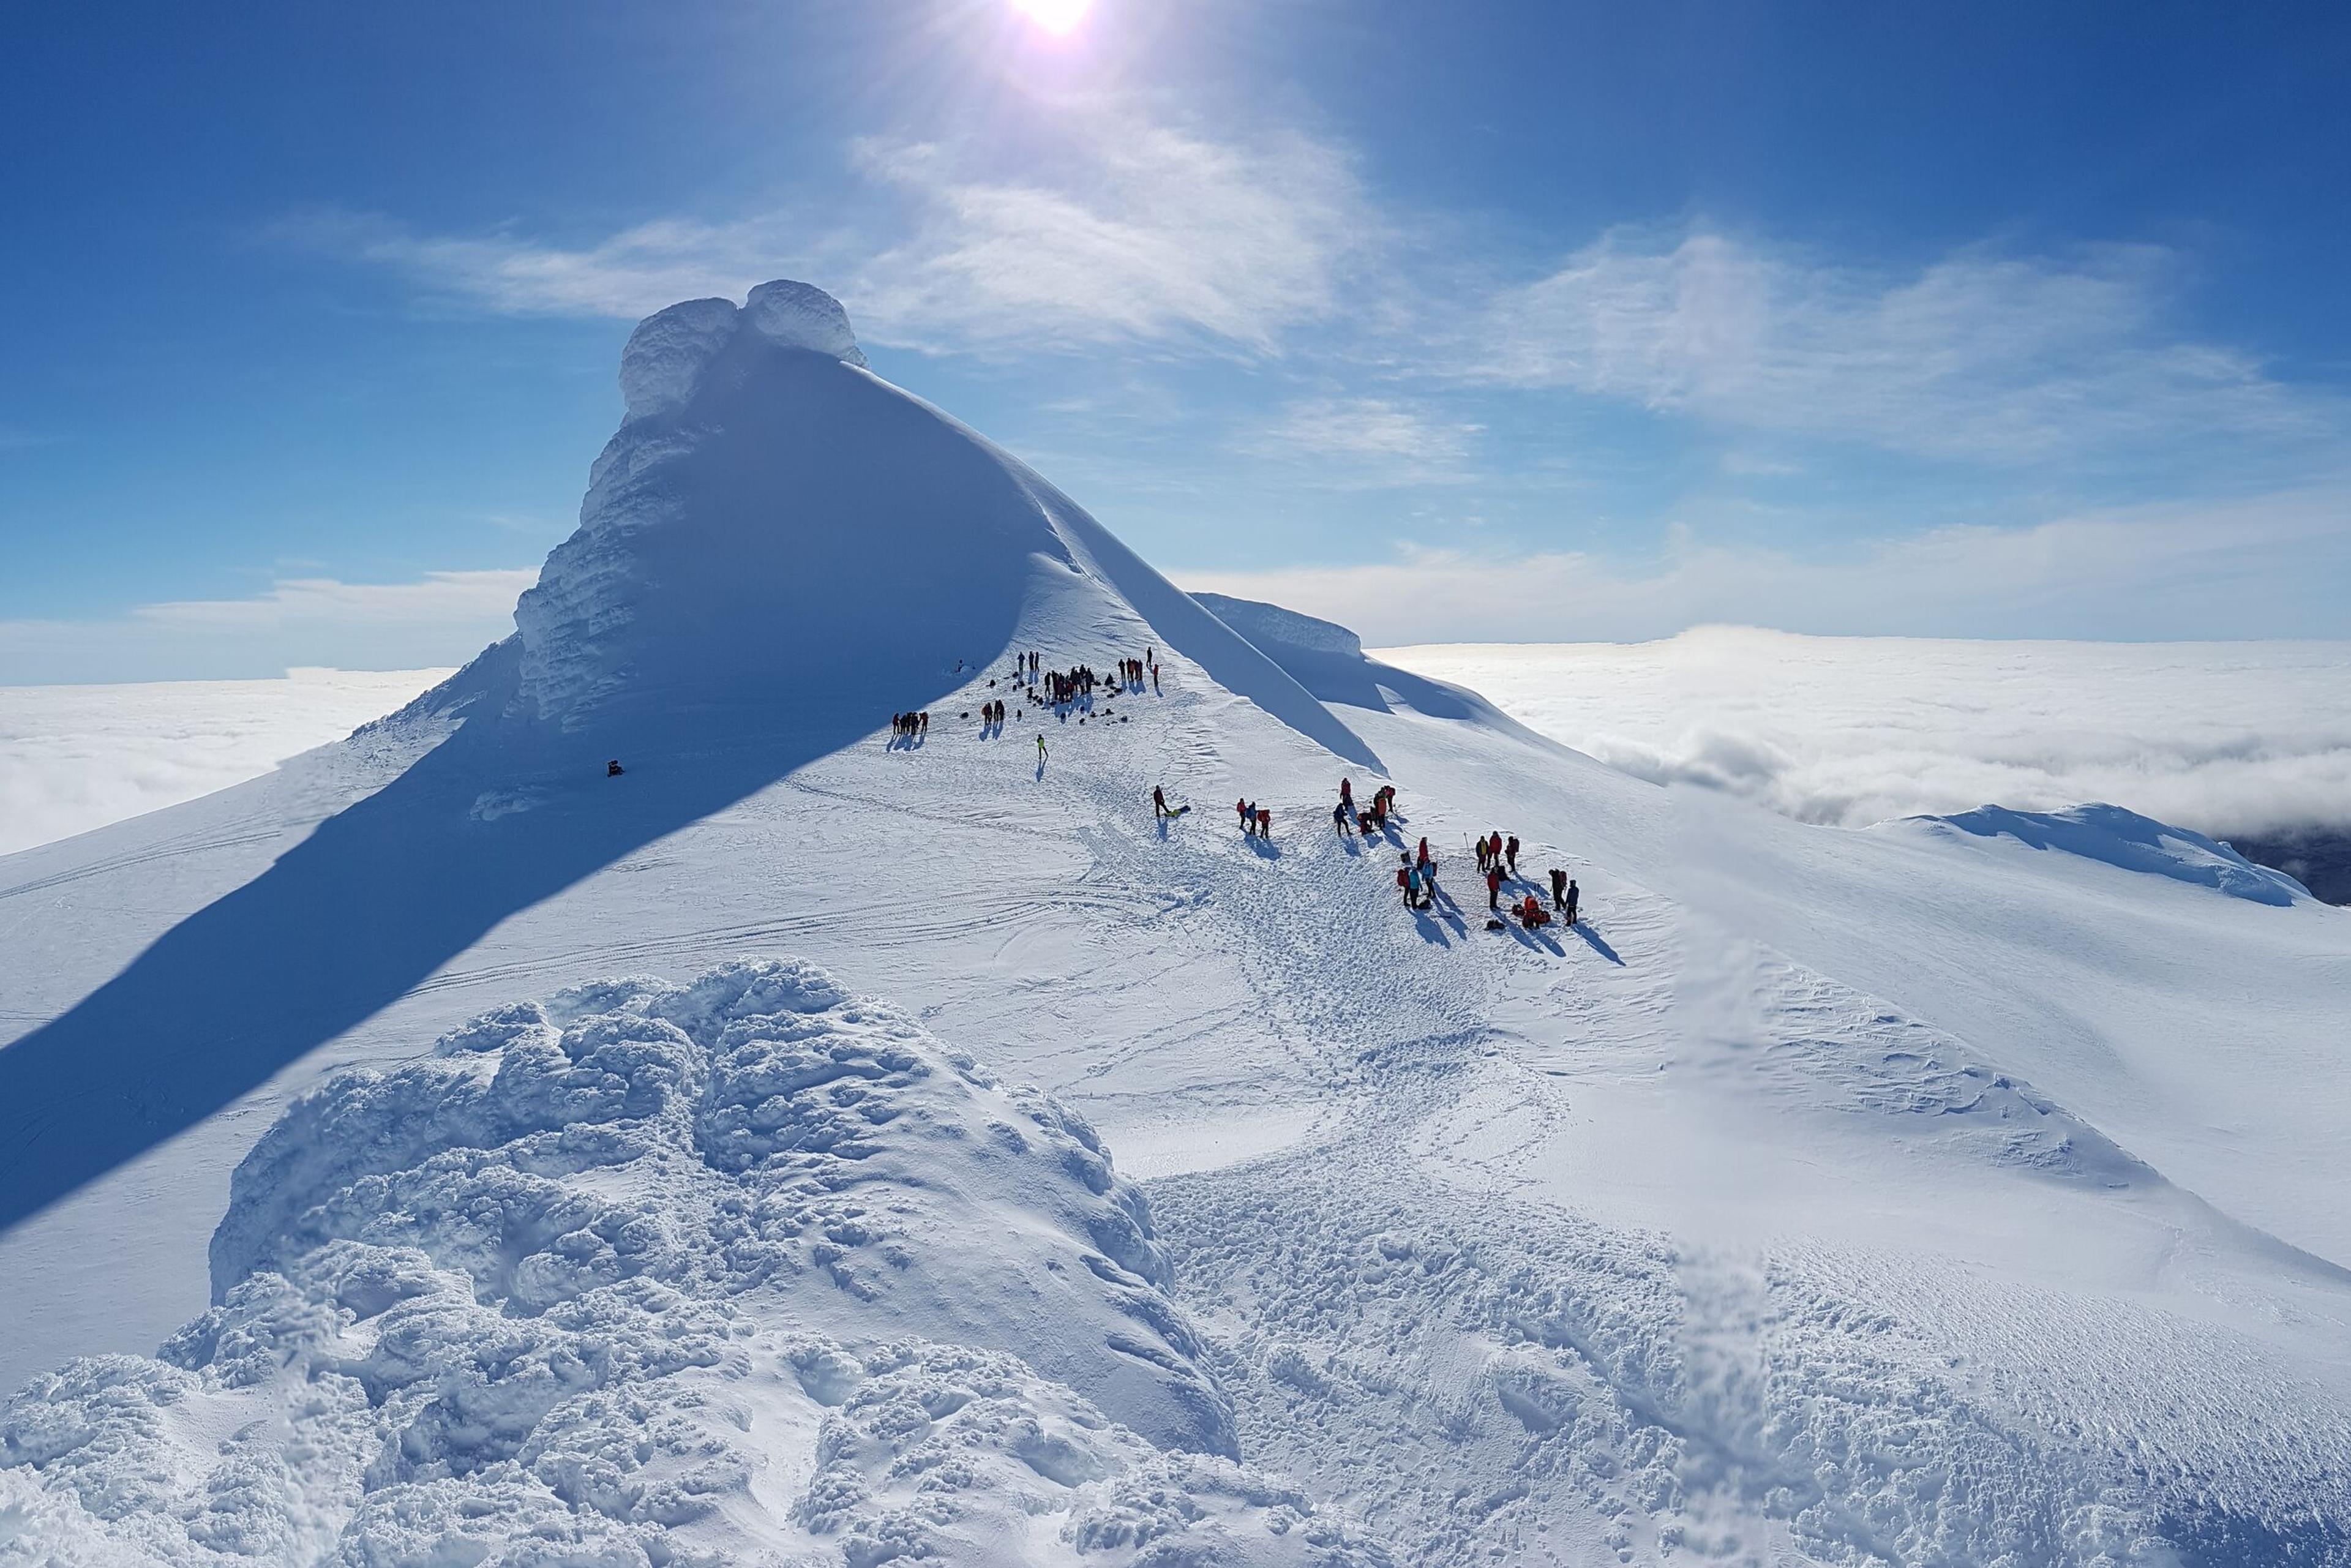  A line of climbers makes their way up a narrow snowy ridge, under a bright sun with a clear blue sky, emphasizing the vastness and isolation of the icy landscape.